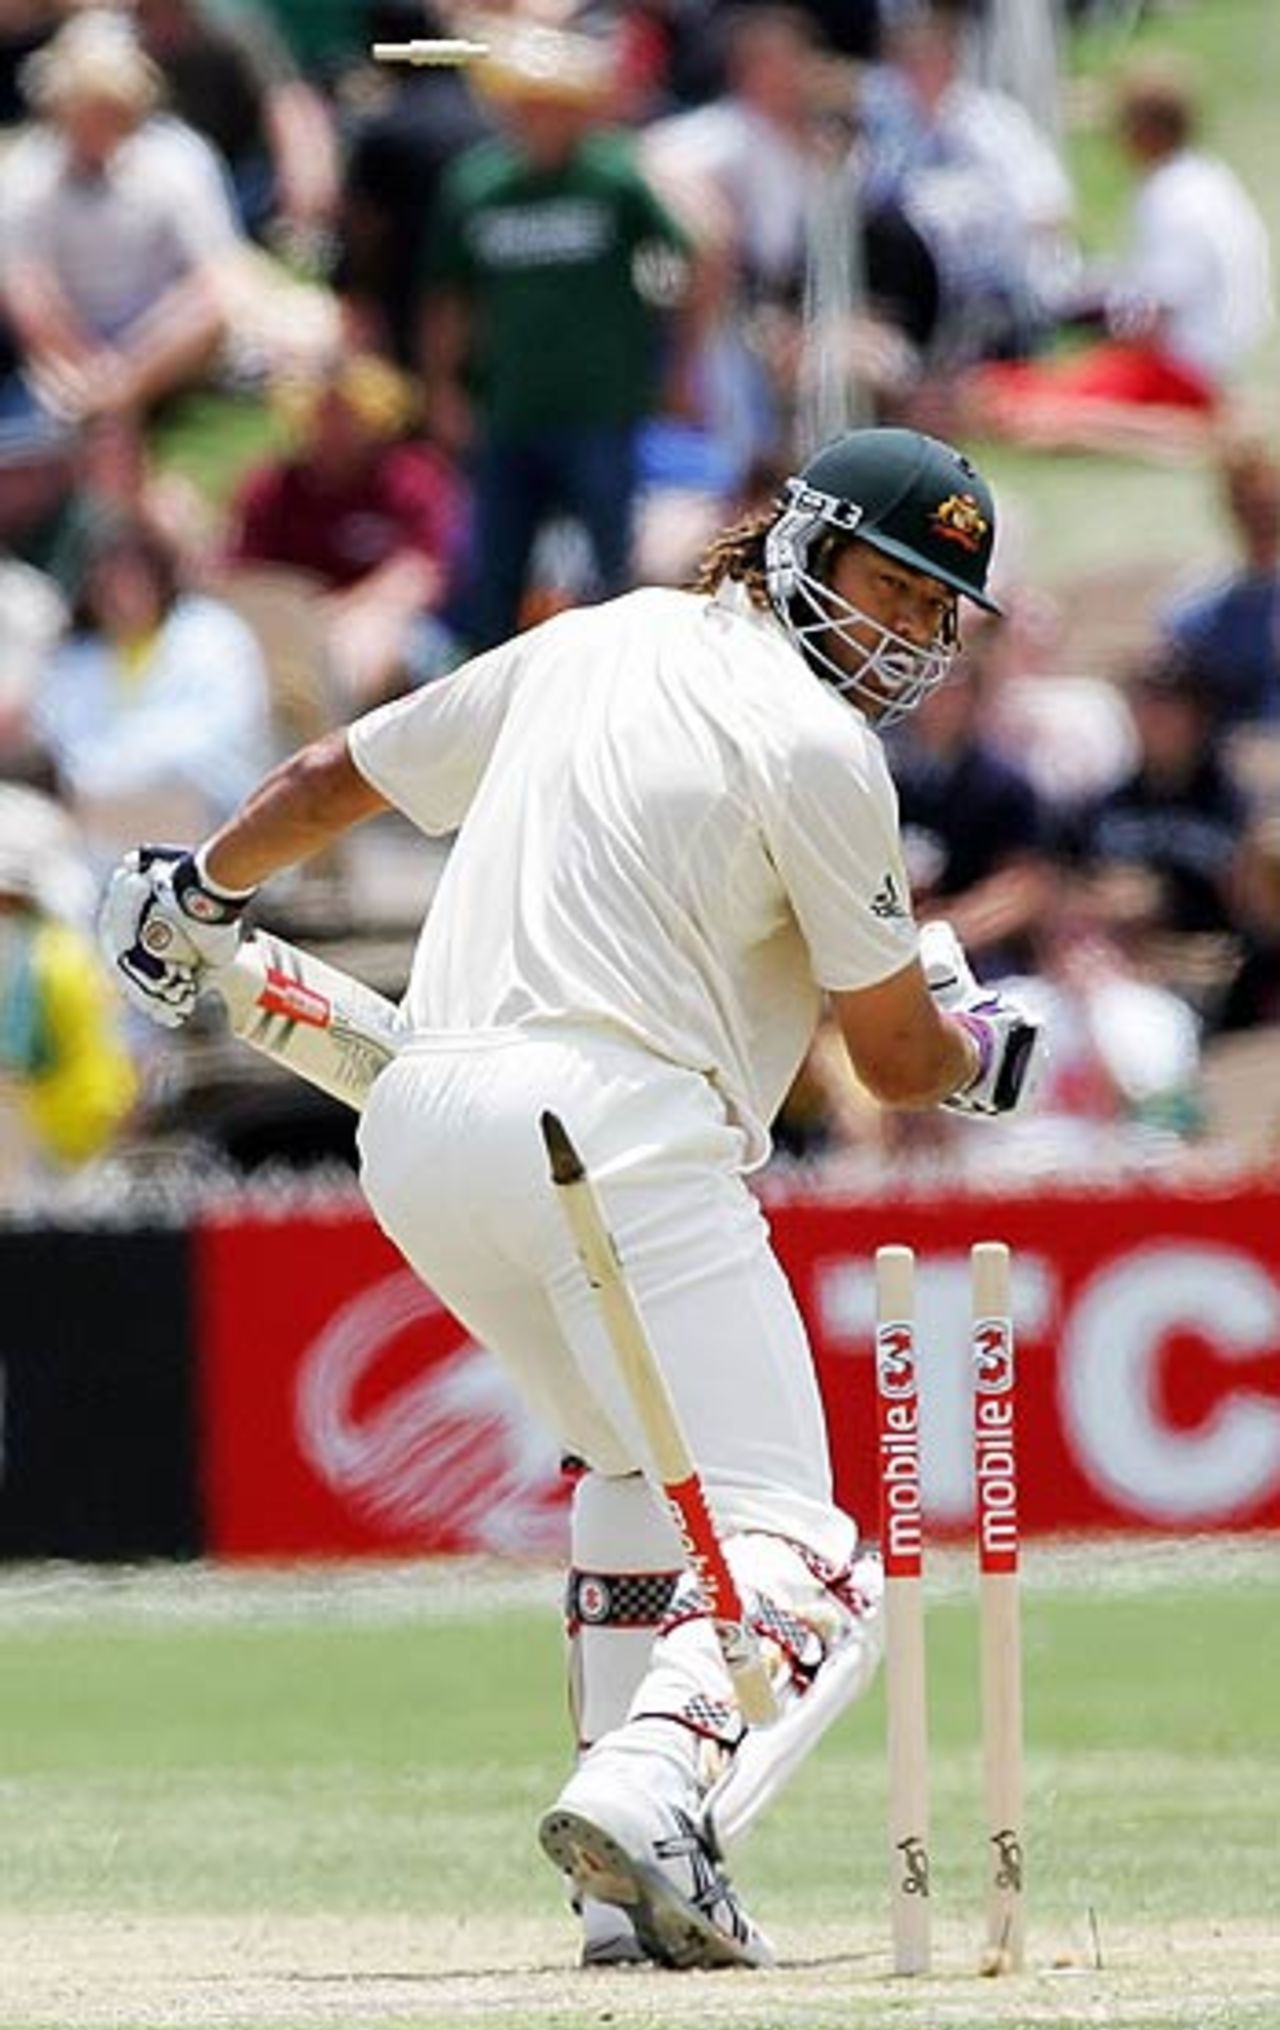 Andrew Symonds is bowled by Dwayne Bravo, Australia v West Indies, 3rd Test, Adelaide, 3rd day, November 27, 2005